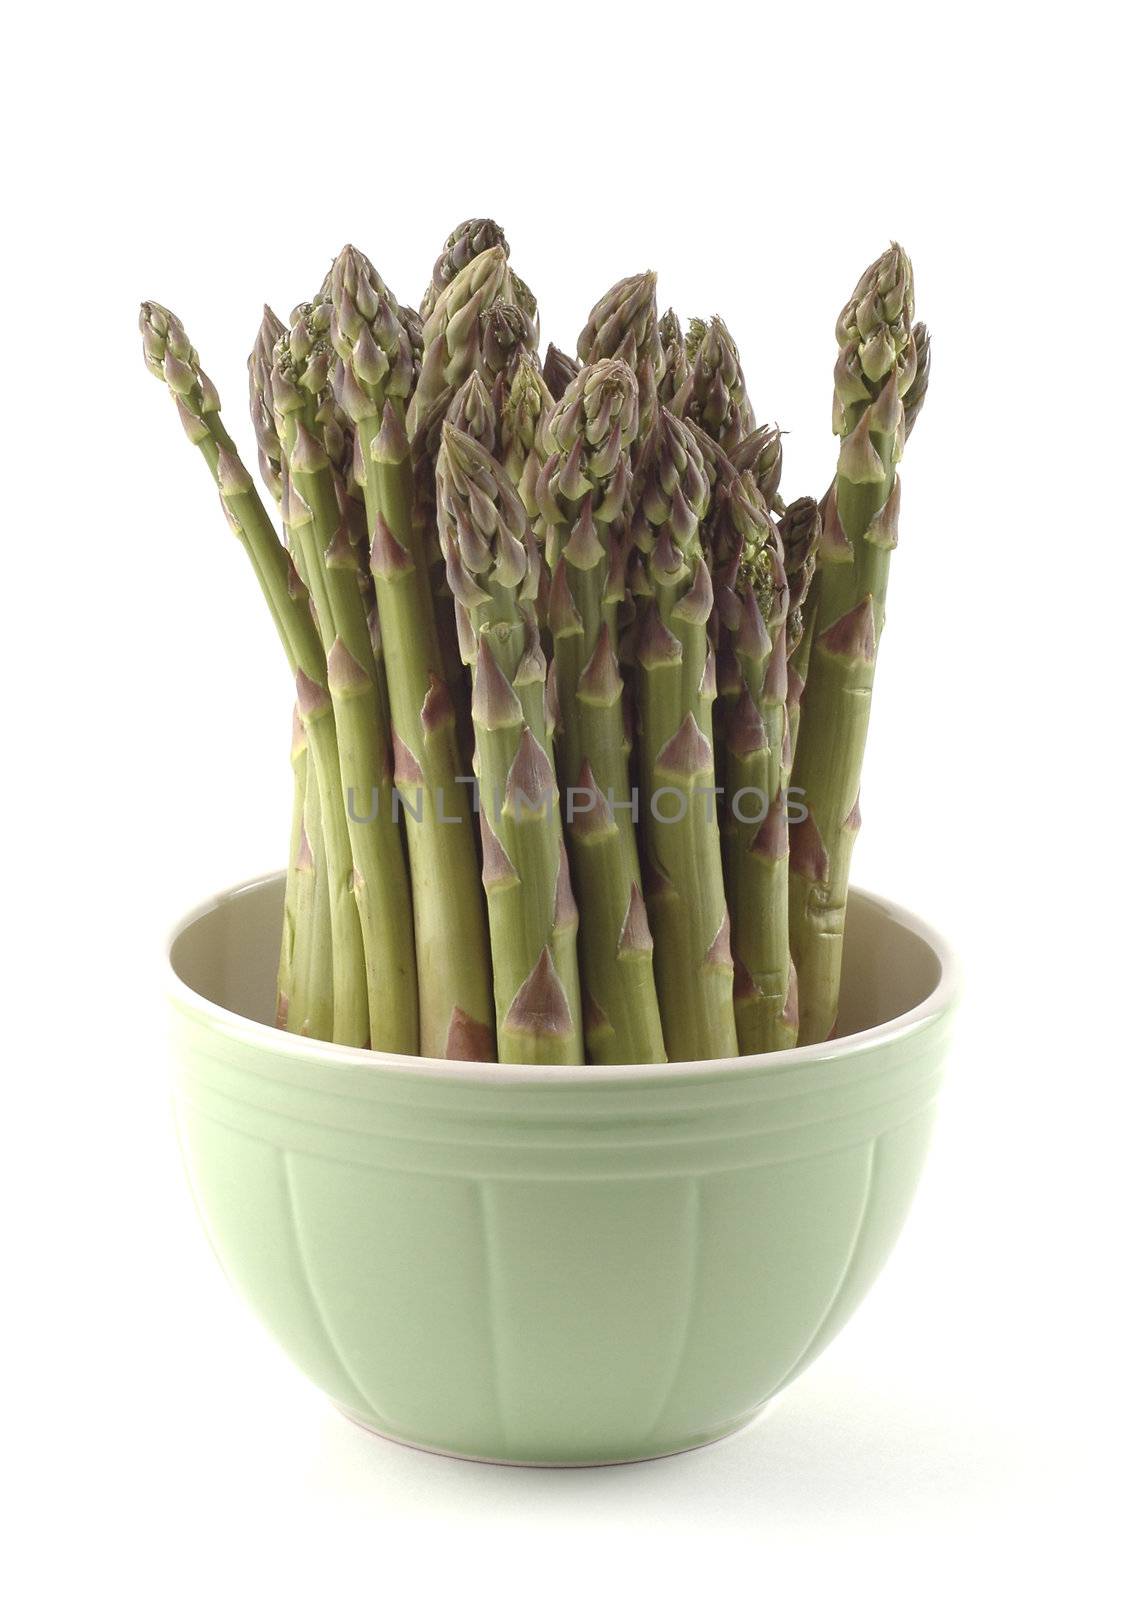 Fresh asparagus presented in a green bowl on white.